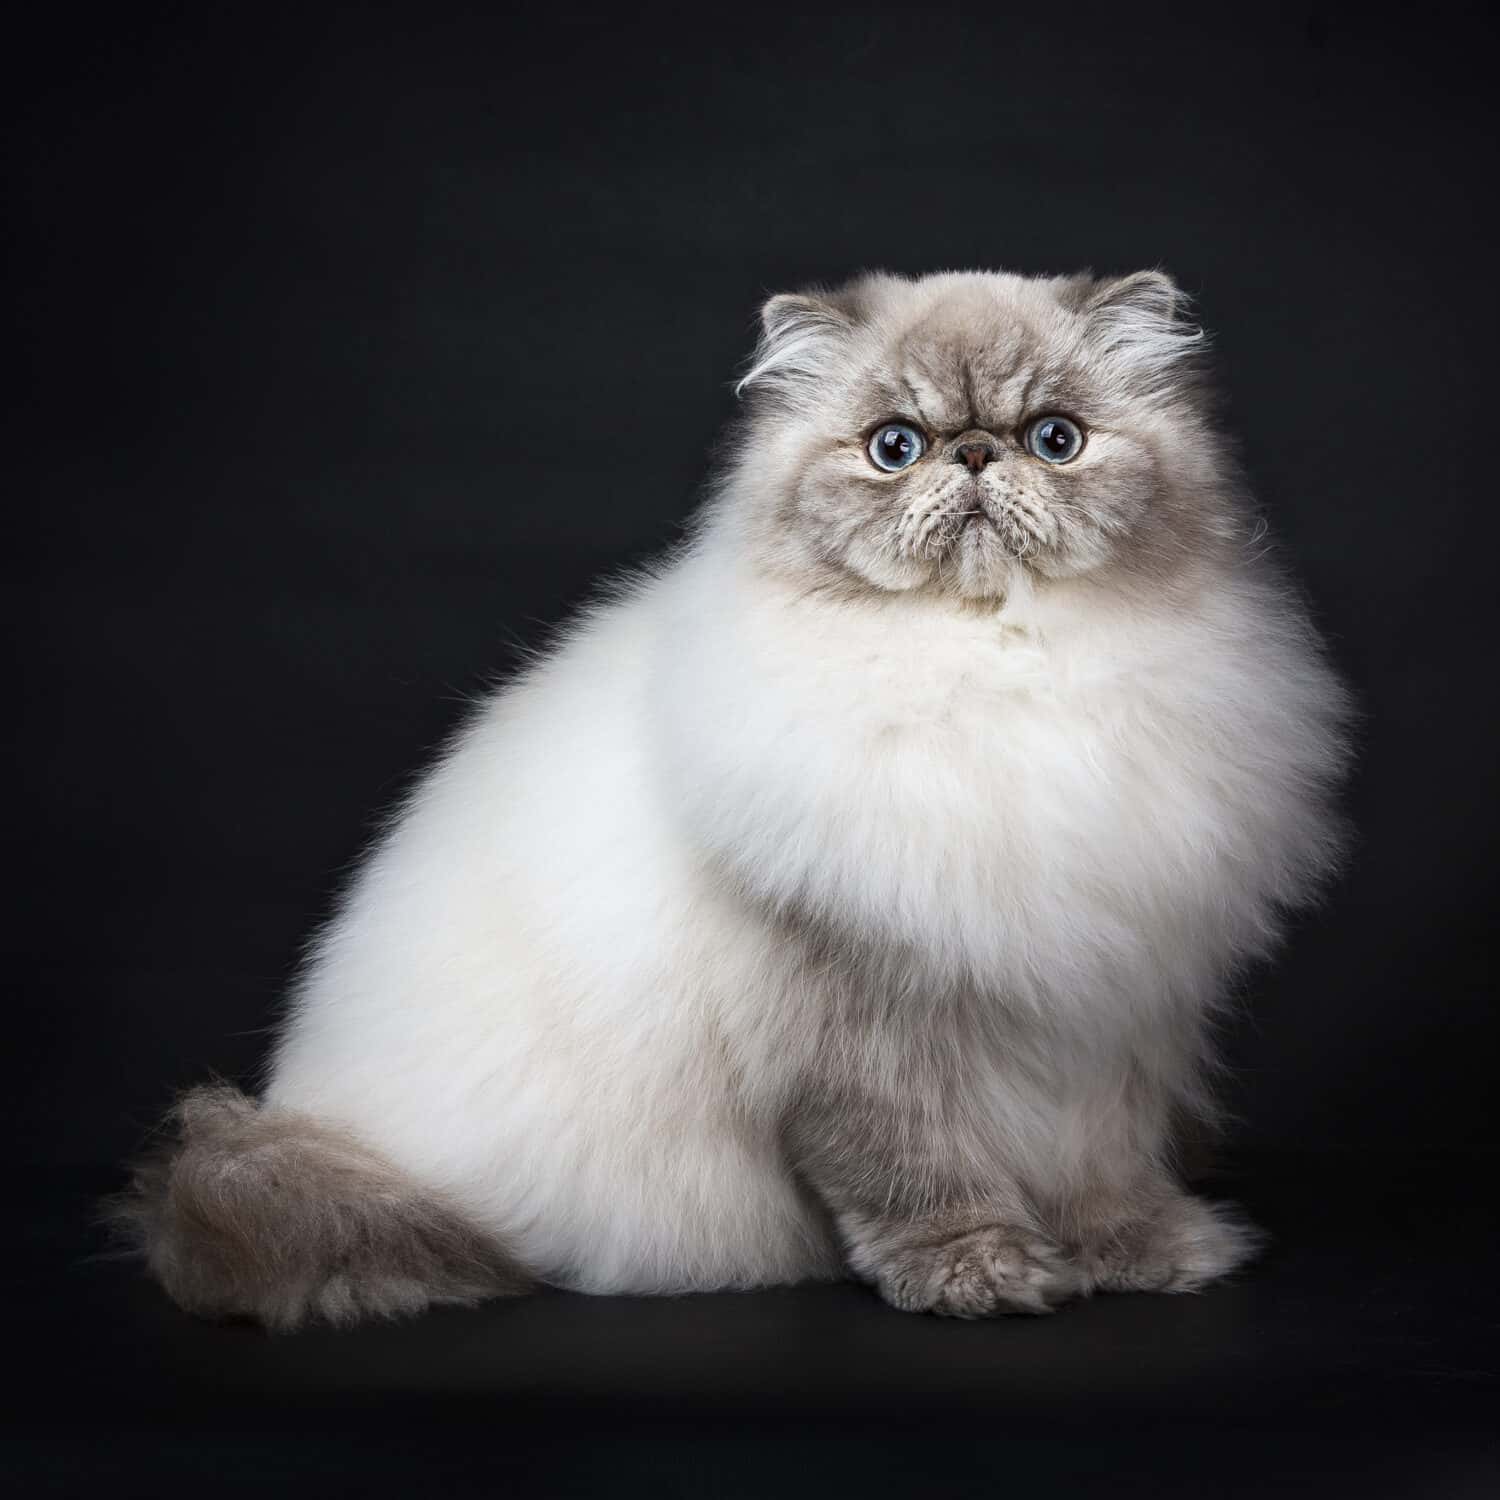 Tabby point persian cat sitting from the side on black background looking at camera